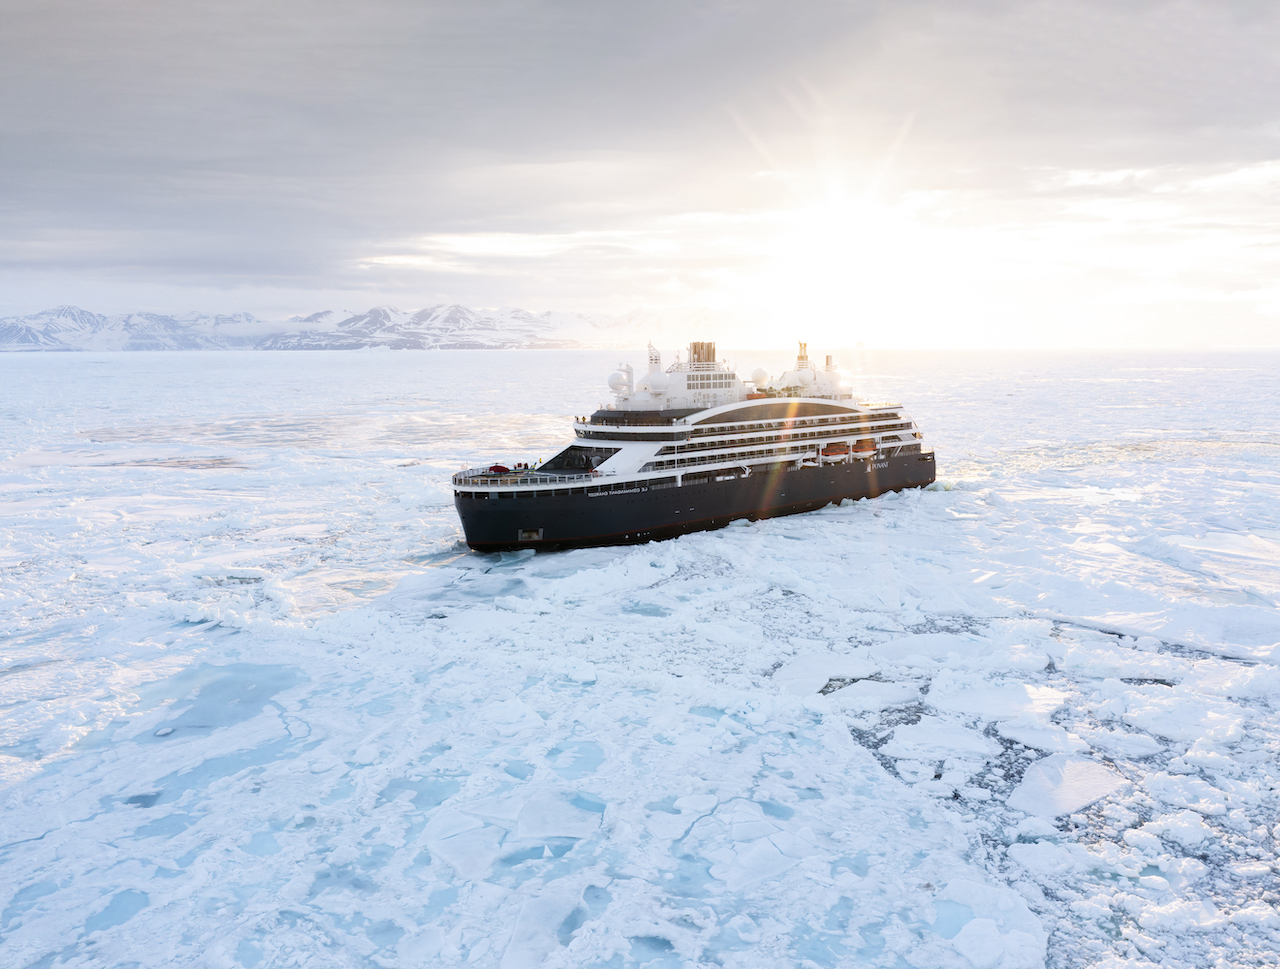 In what will be a world first for a cruise ship, Ponant's 2024-2025 winter programme is now offering a breathtaking voyage through the ice of the St Lawrence River to pristine Québec and the Innu and Micmac communities of Canada.